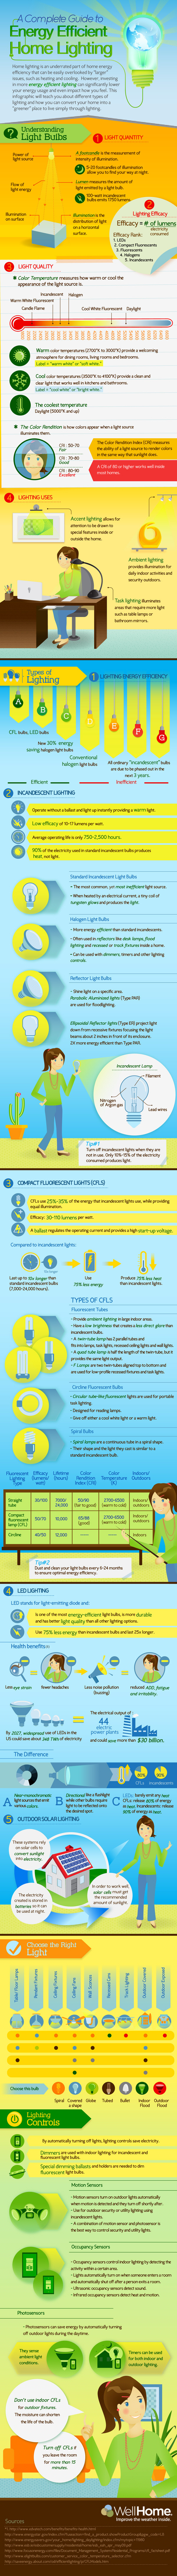 Complete Guide to Energy Efficient Home Lighting